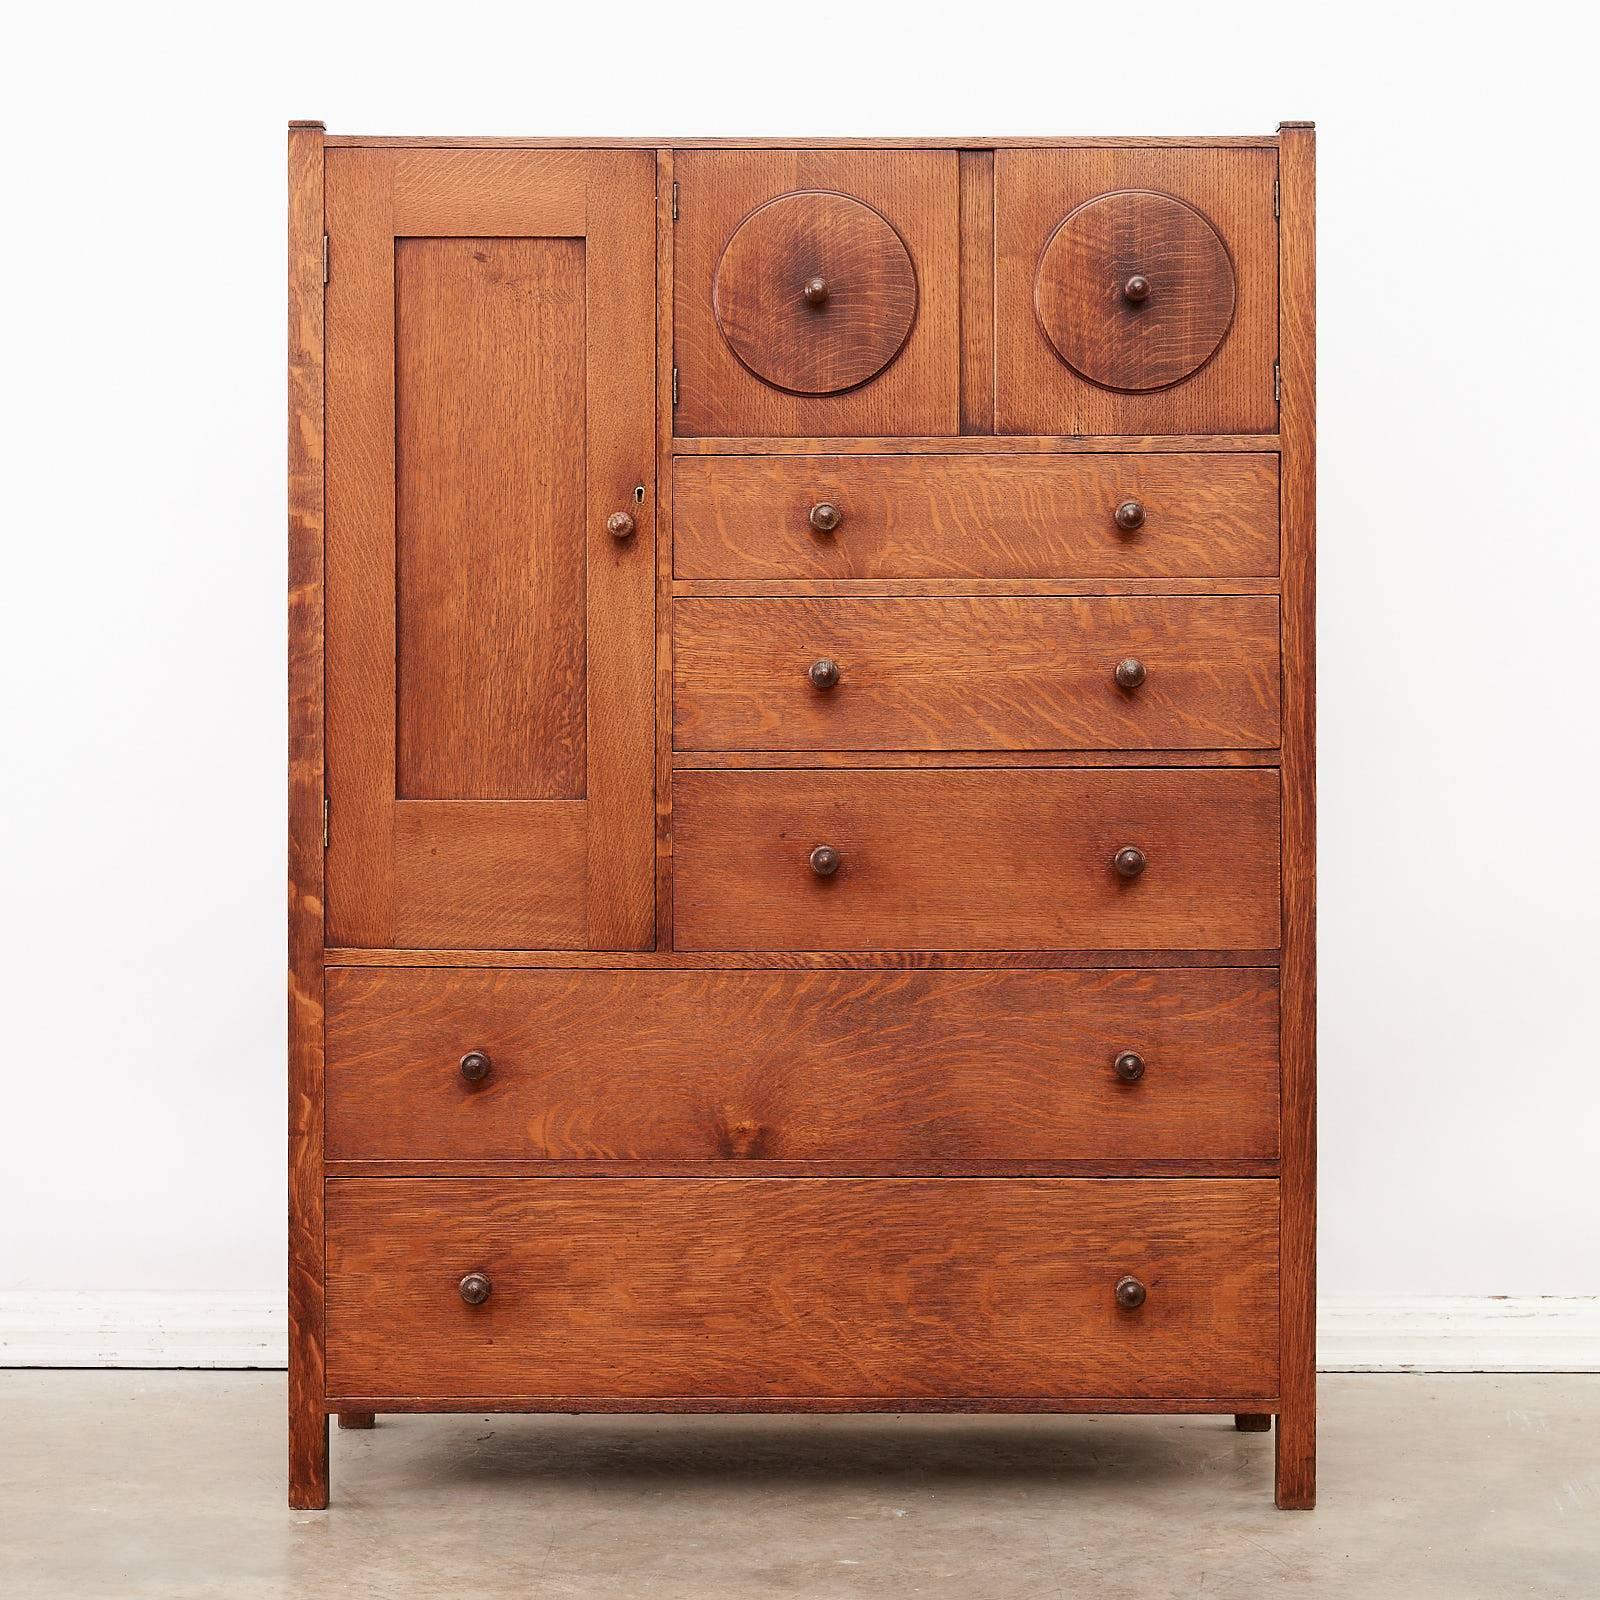 Designed by Ambrose Heal, circa 1902, a solid oak, Arts and Crafts chest of drawers with a pair of 'owl's eye' cabinet doors and a large cabinet door with later shelves, all constructed of solid quarter sawn oak.